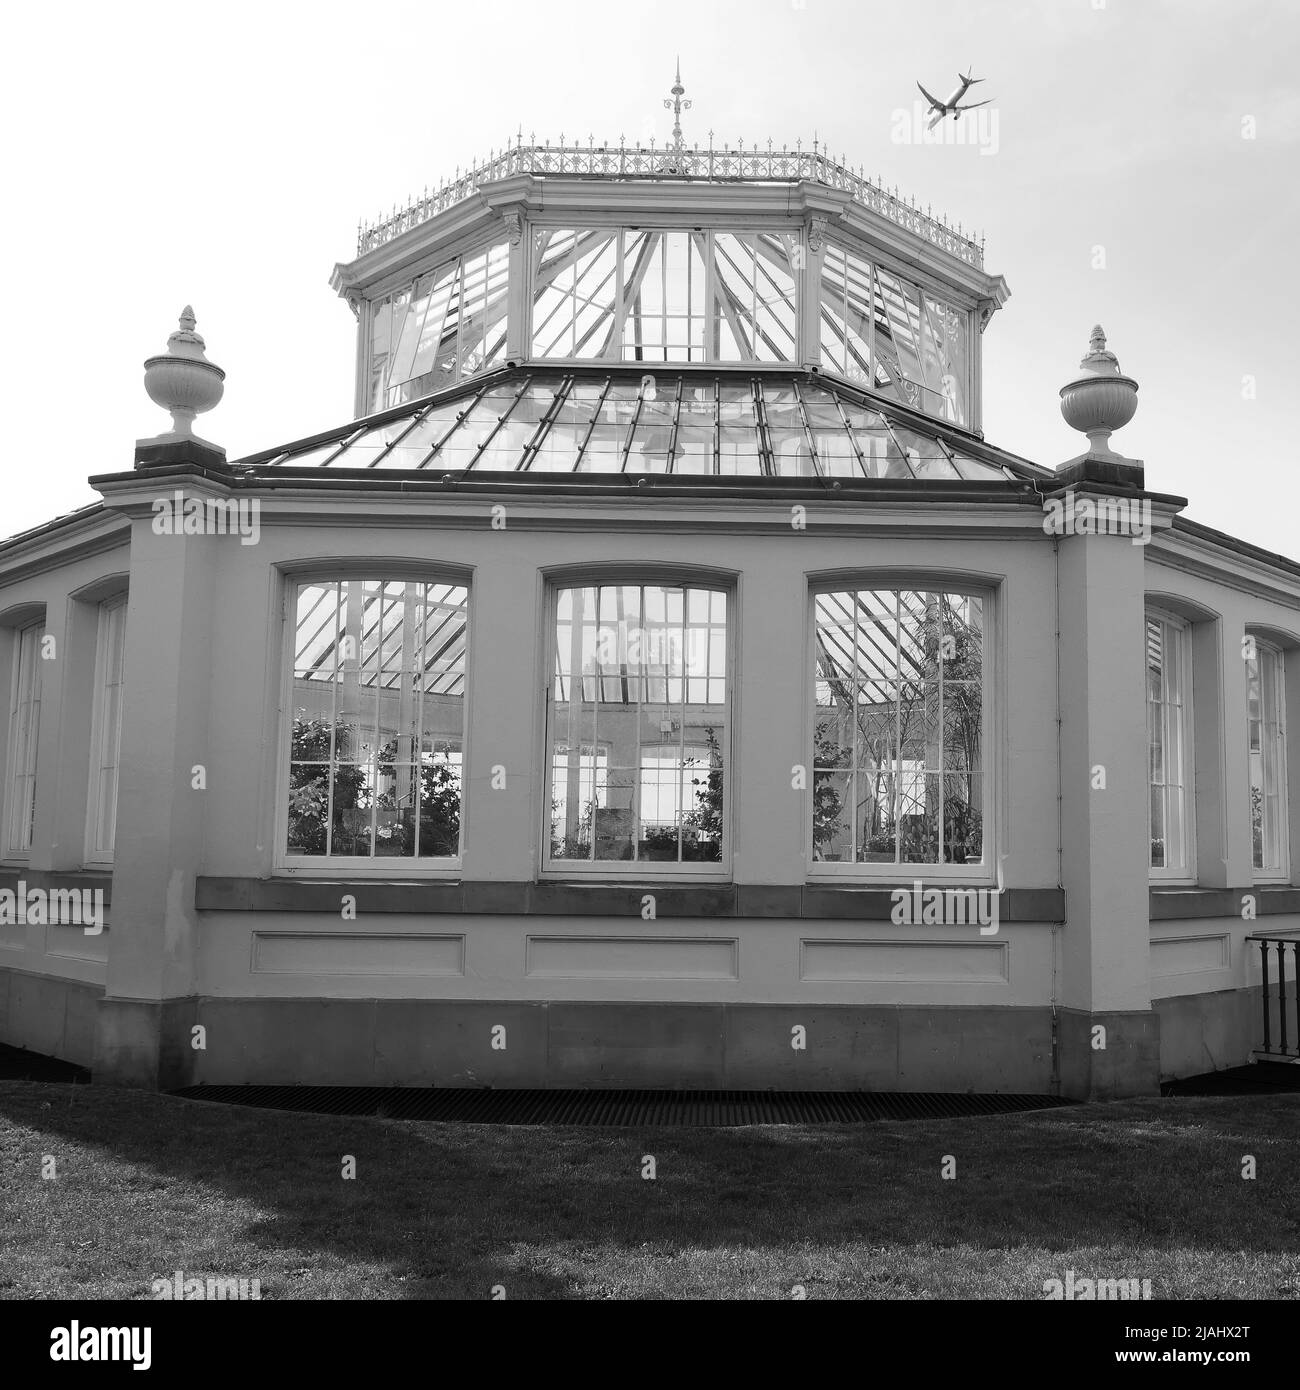 Richmond, Greater London, England, May 18 2022: Royal Botanic Gardens Kew. Temperate House with plane flying above. Monochrome. Stock Photo